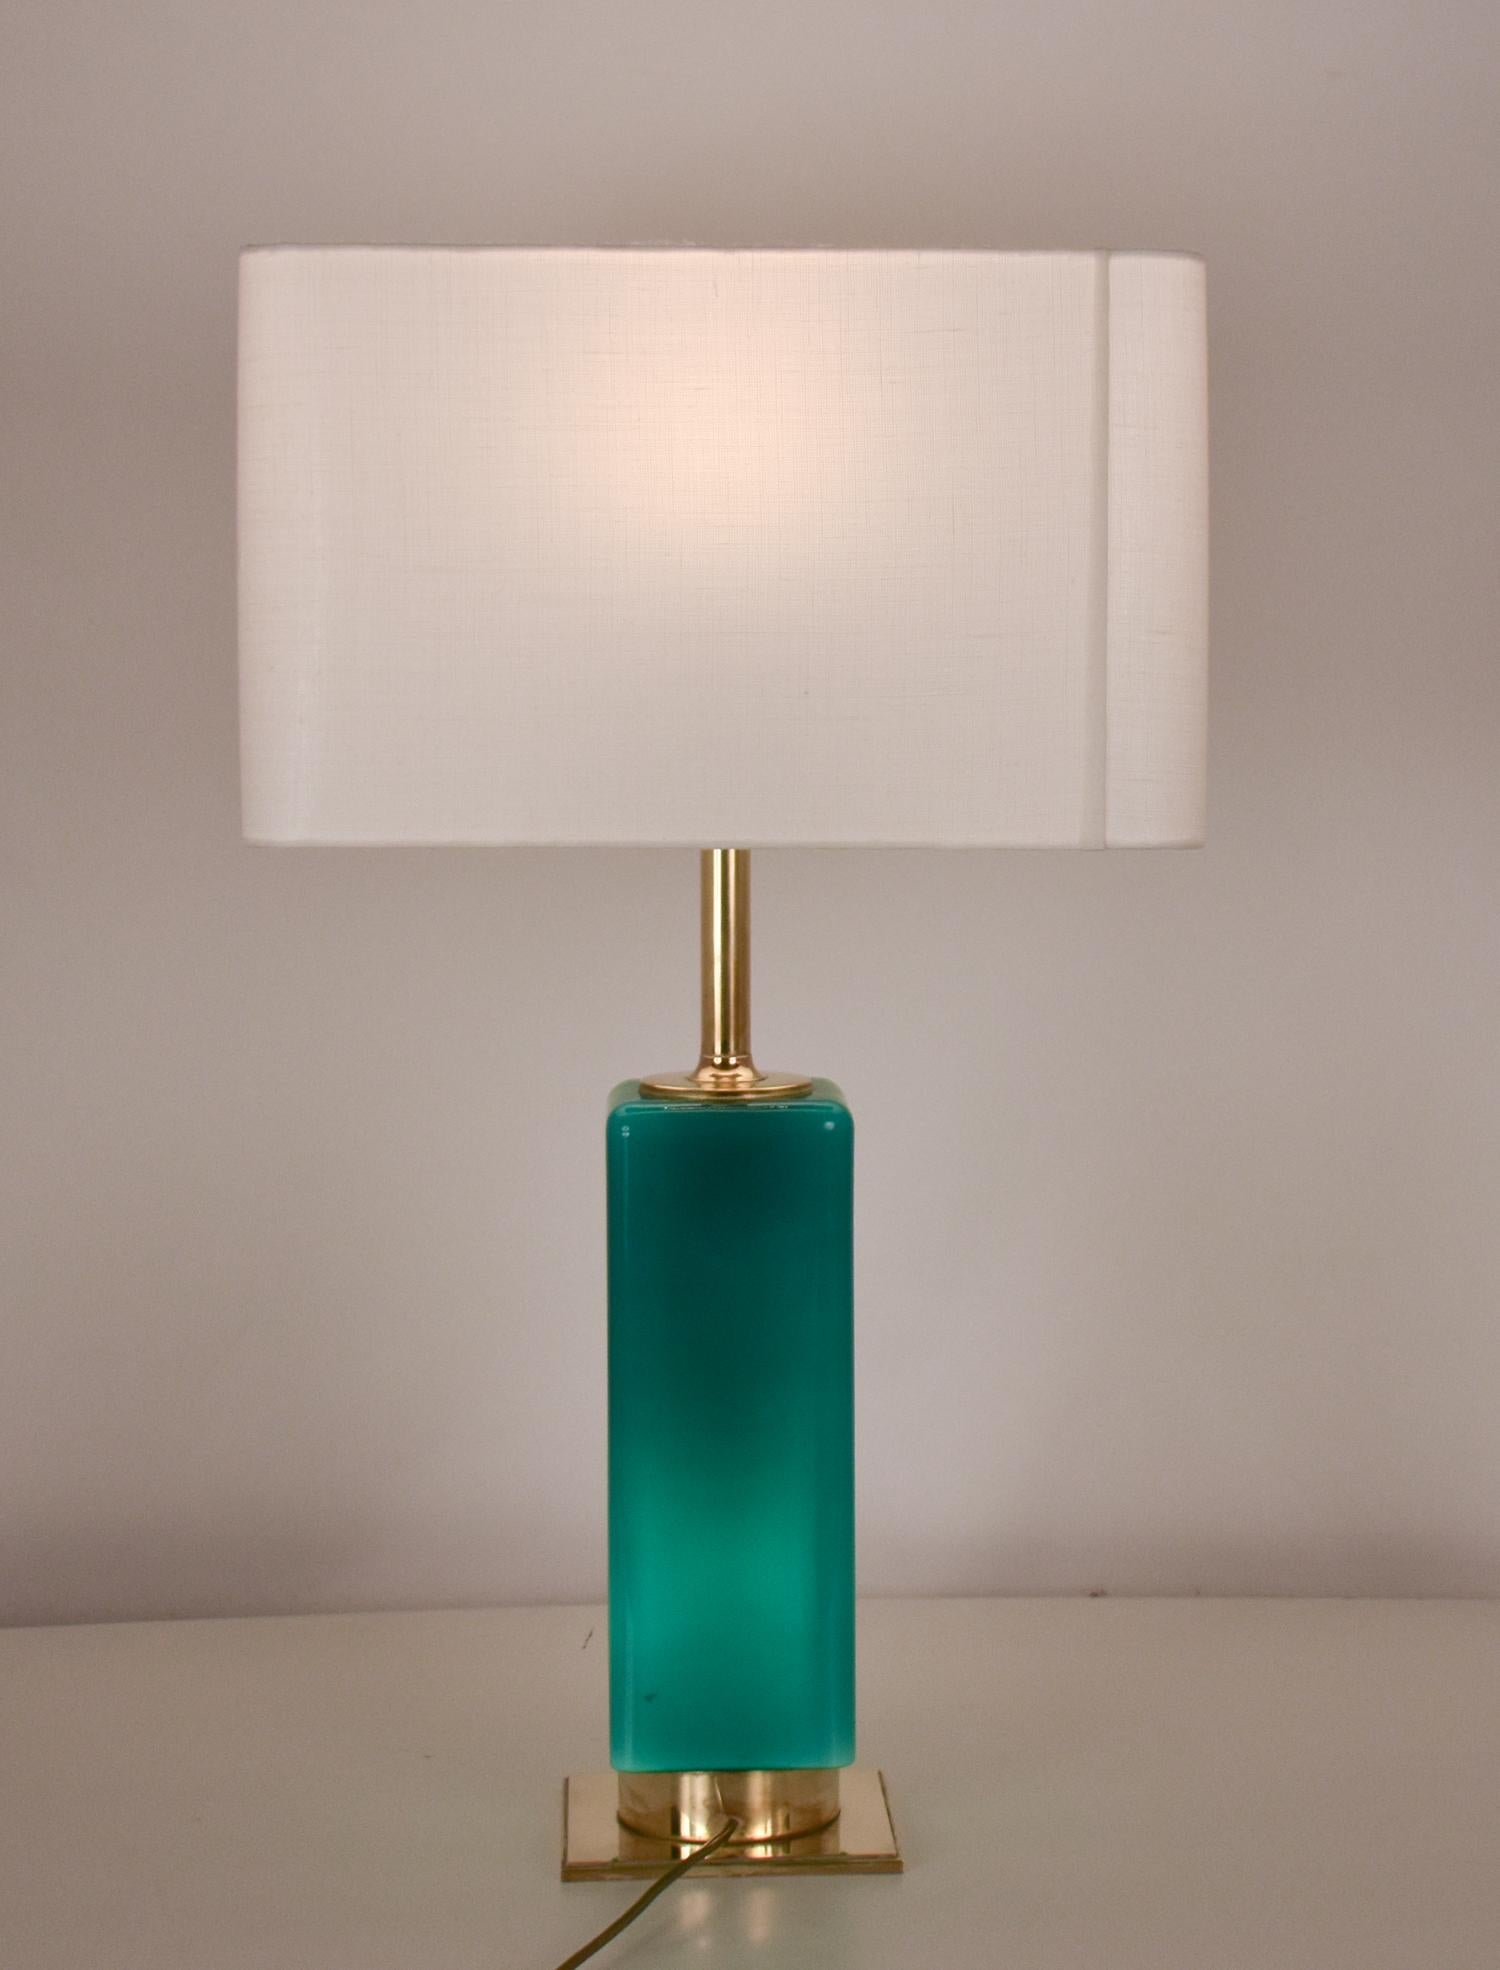 Mid- Century Large Green Glass and Brass Table Lamp Metalarte, Spain, 1970's For Sale 4